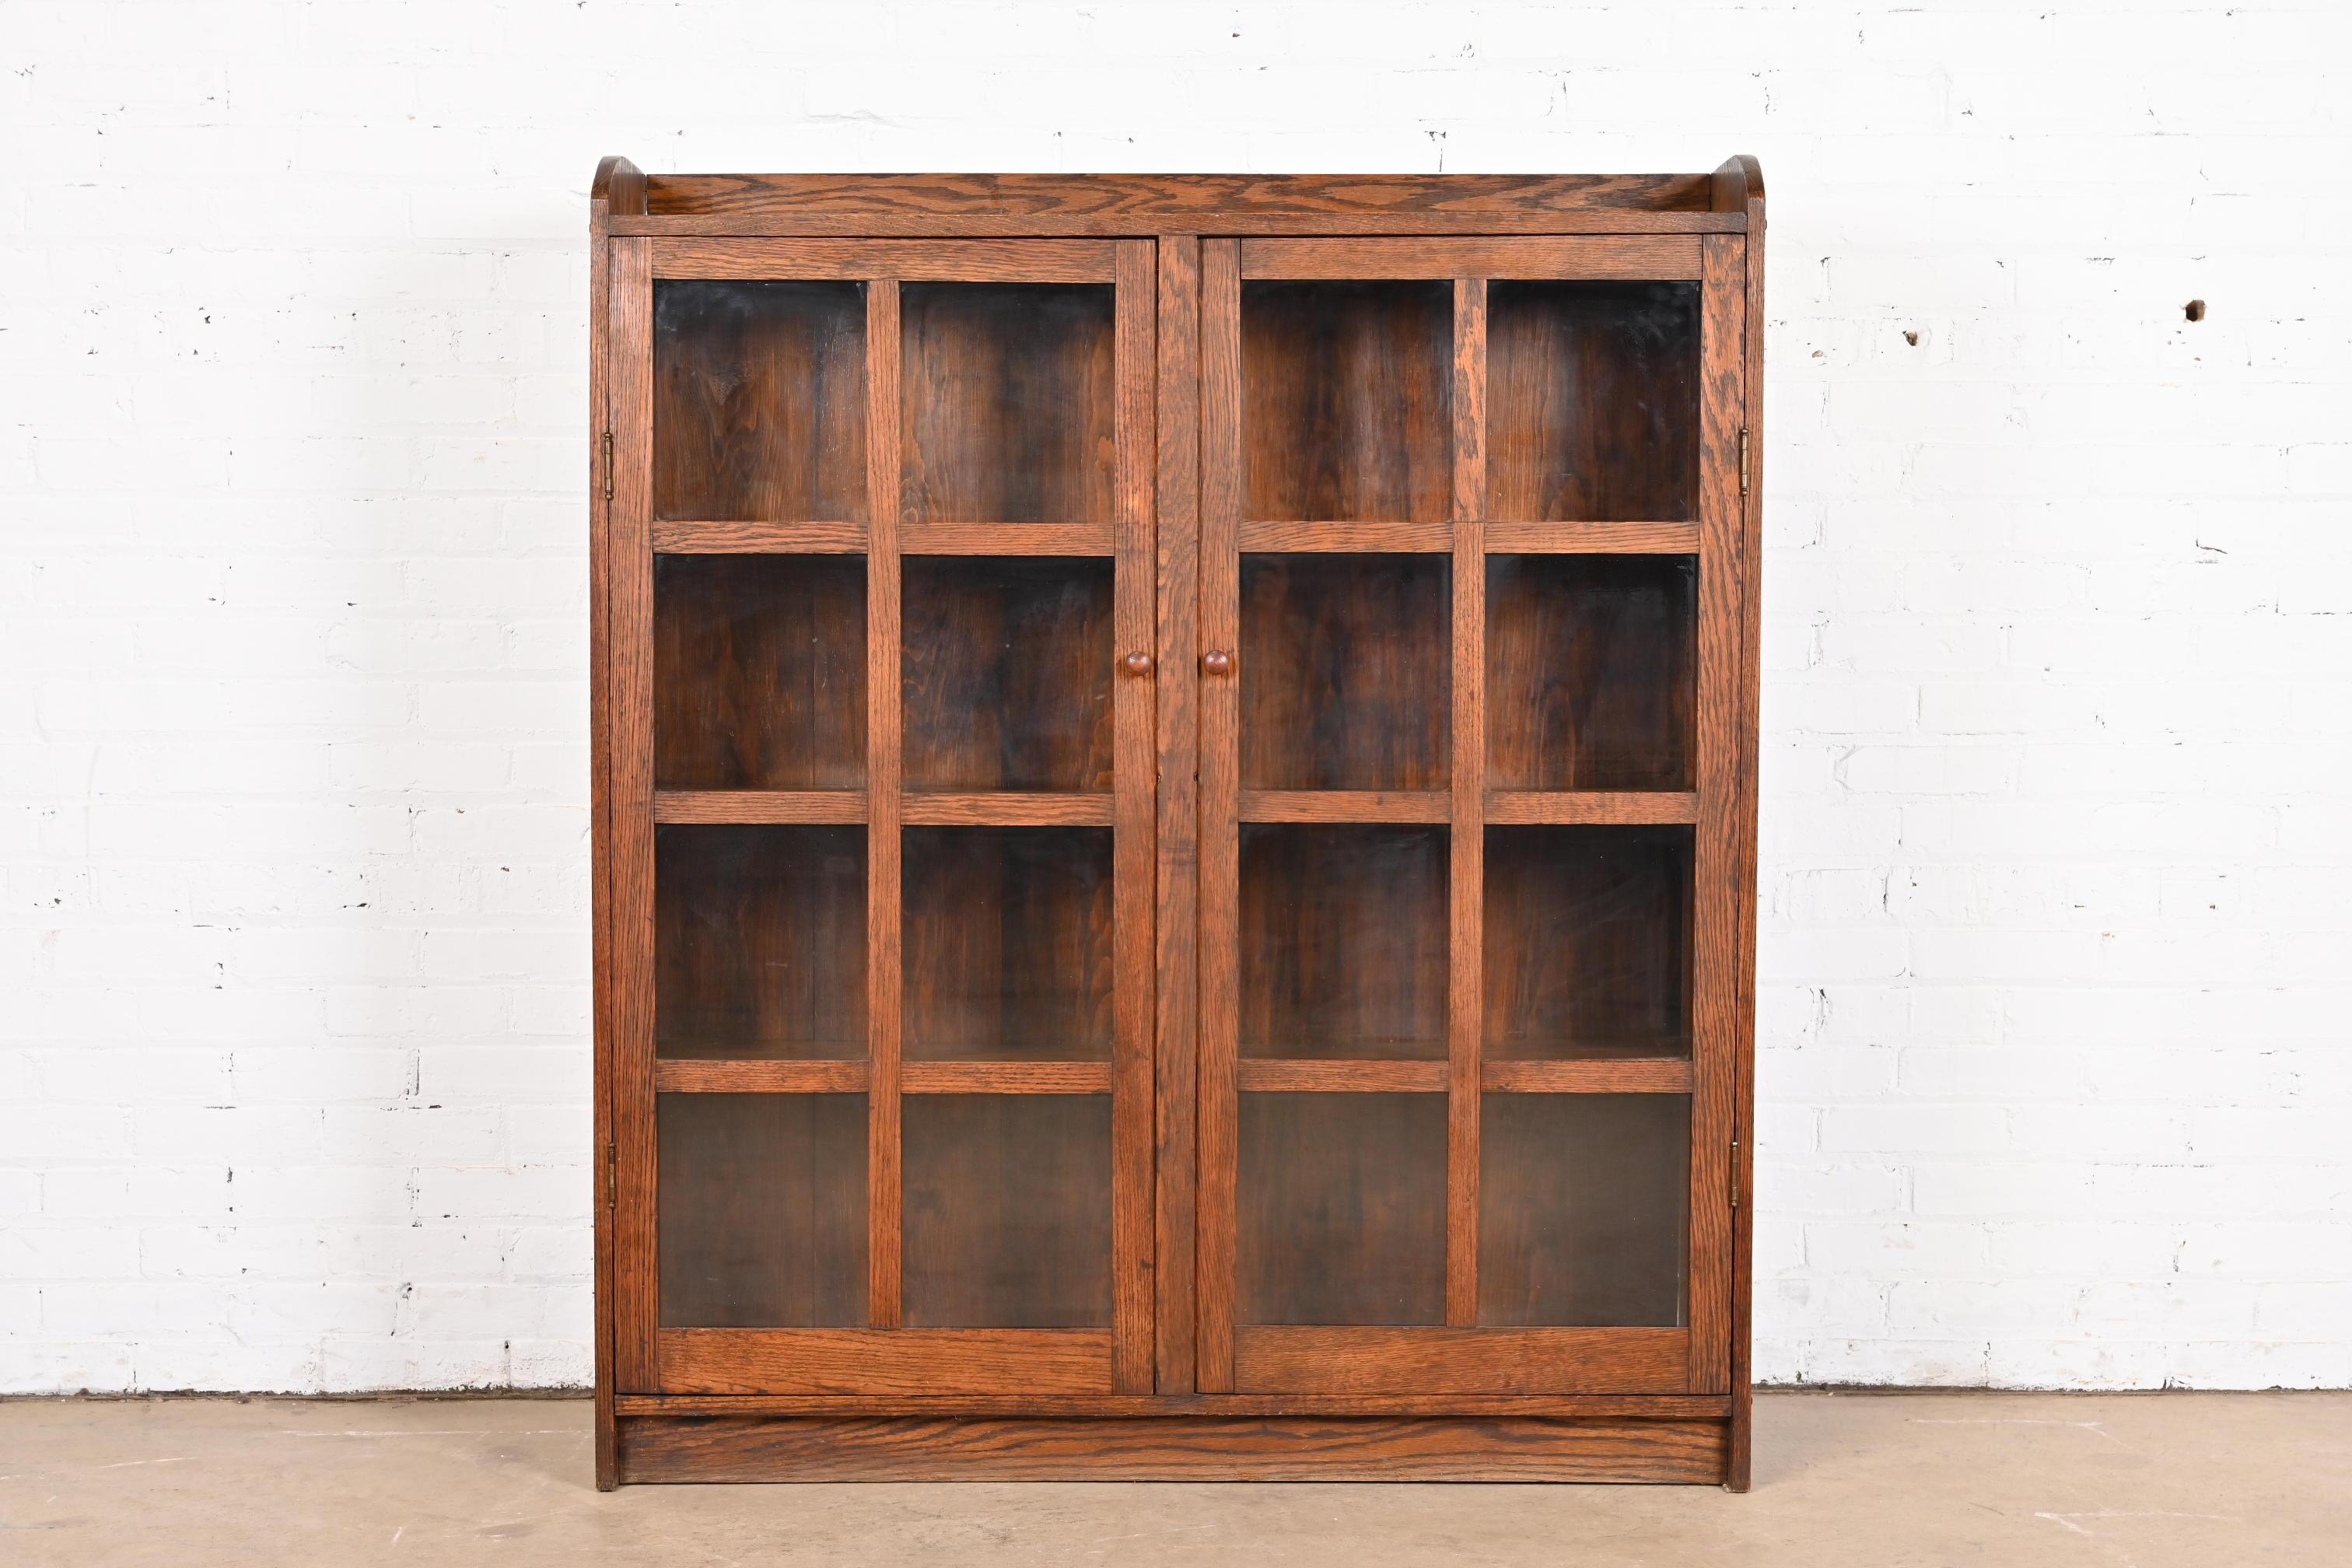 A gorgeous antique Mission or Arts & Crafts bookcase cabinet

In the manner of Stickley Brothers

USA, Circa 1900

Carved oak, with mullioned glass front doors.

Measures: 47.25